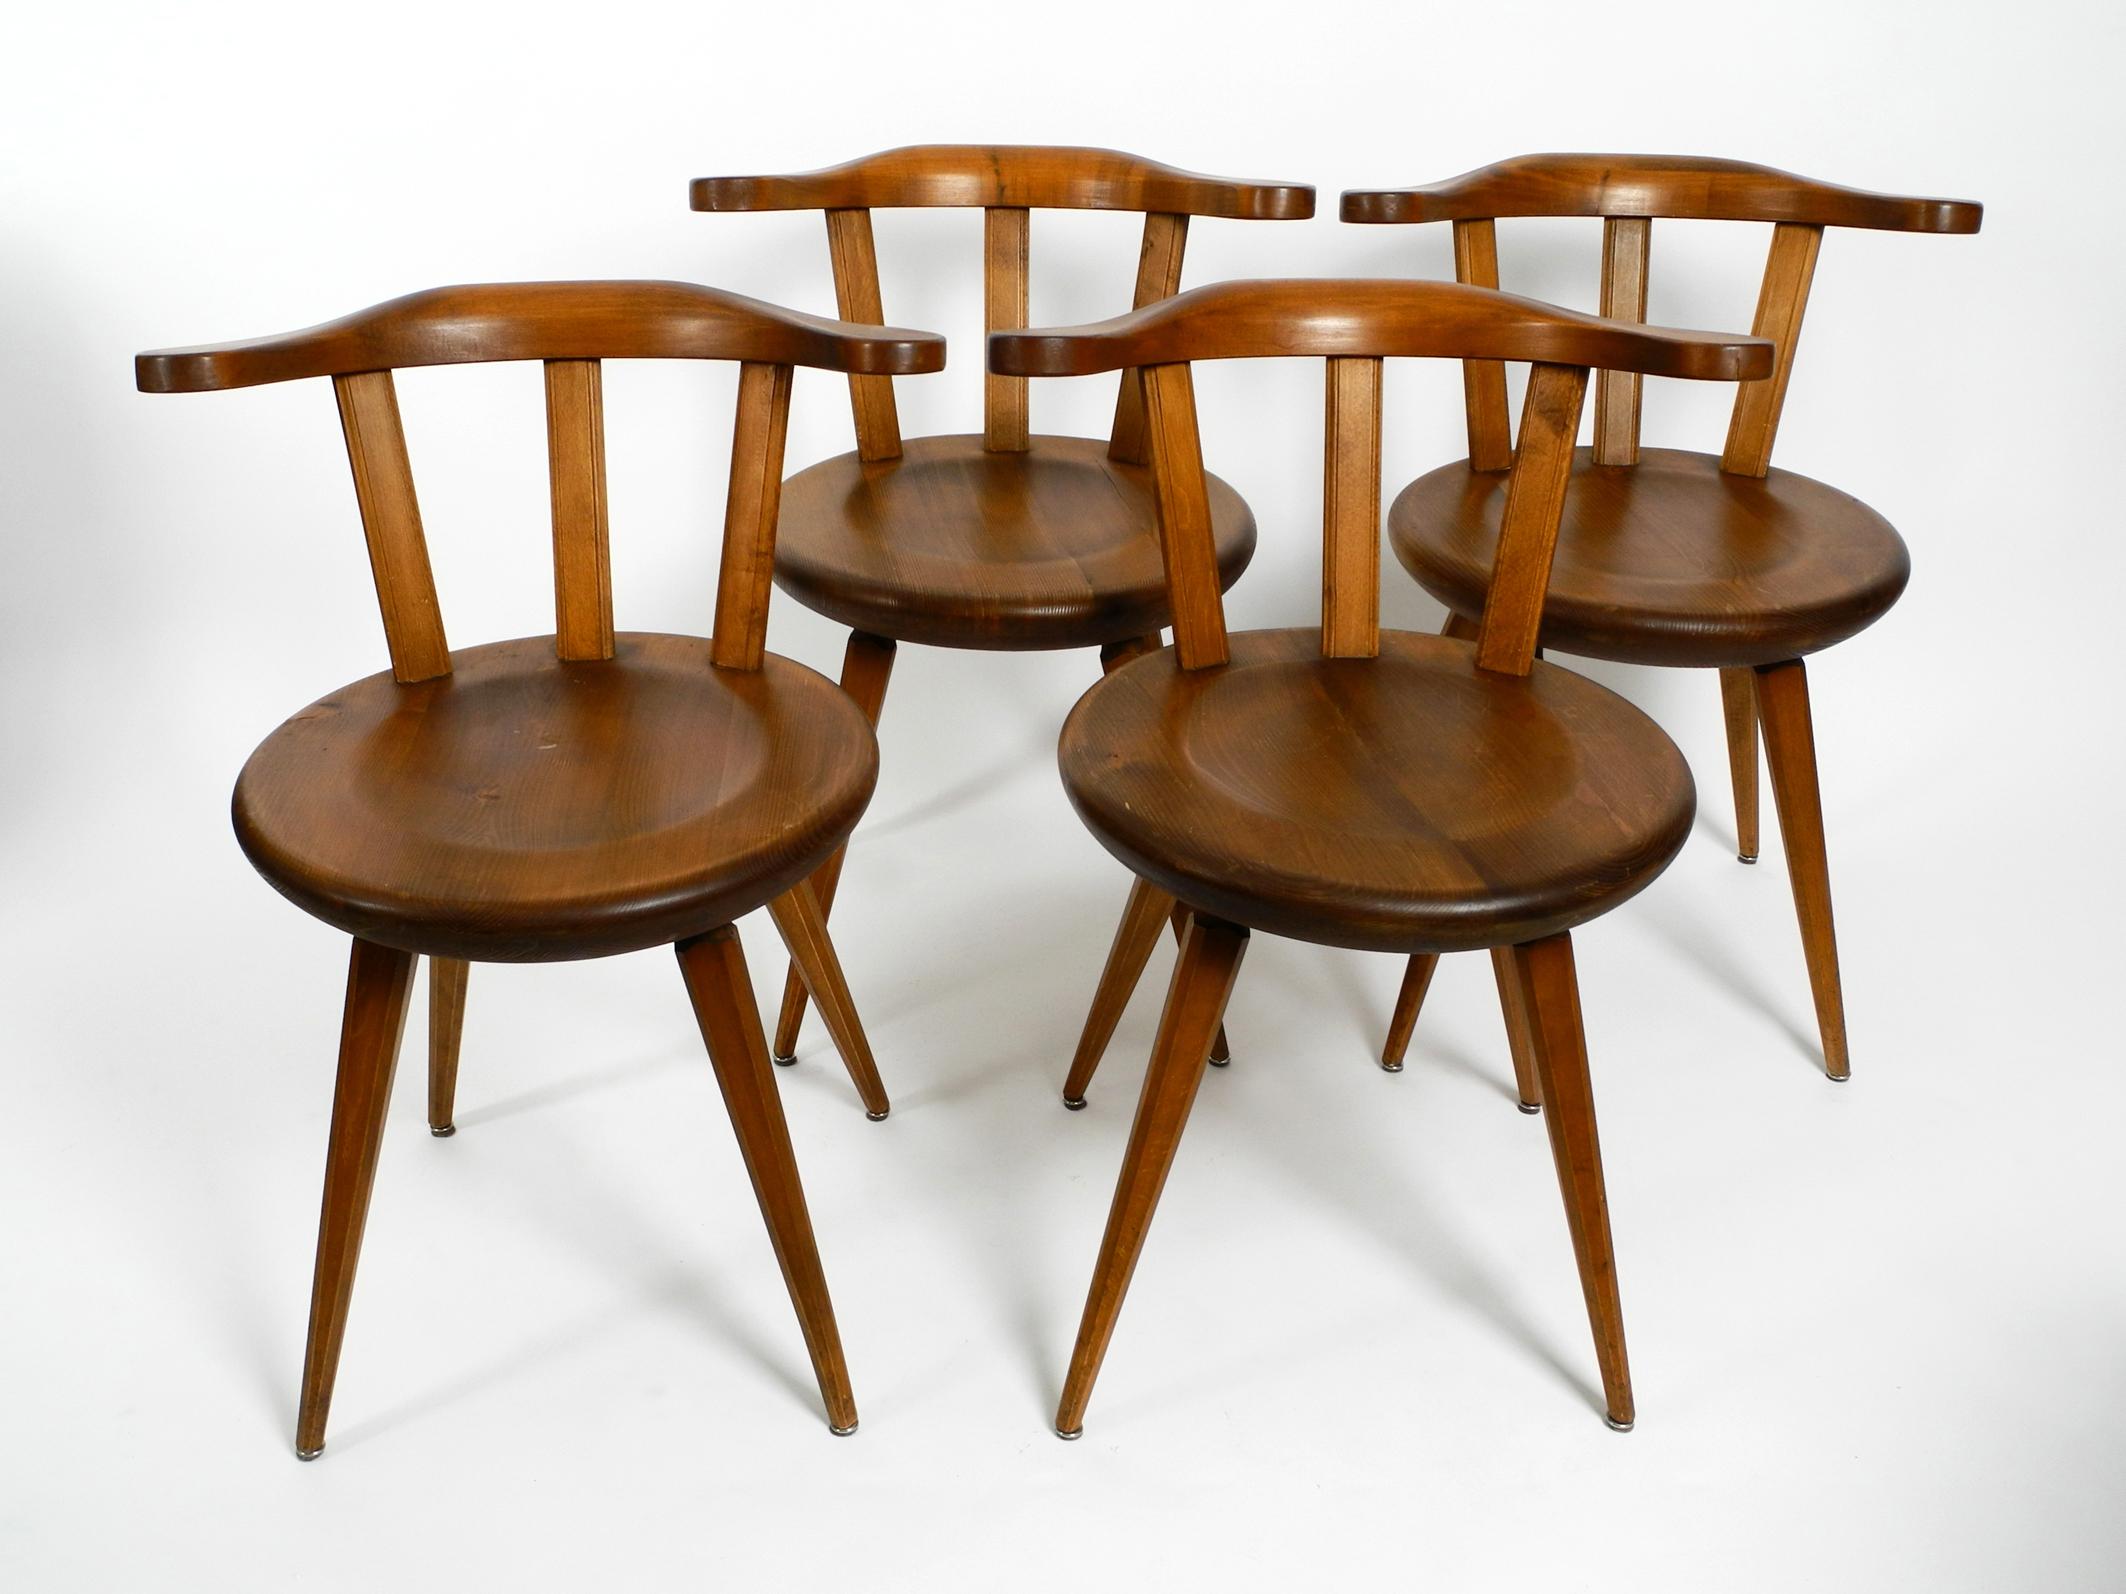 German Four Massive, Beautiful Mid-Century Solid Wood Sprouted Chairs with Low Backs